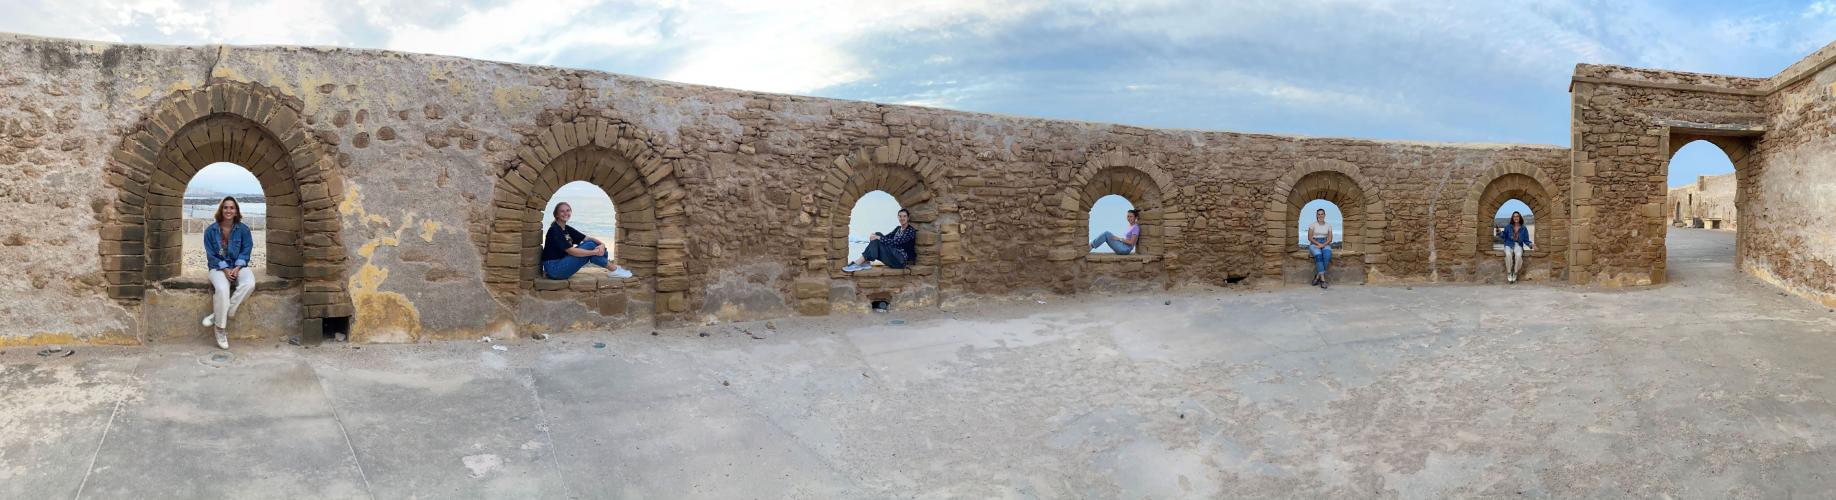 Students sit inside separate arches in a panorama image of an old wall.